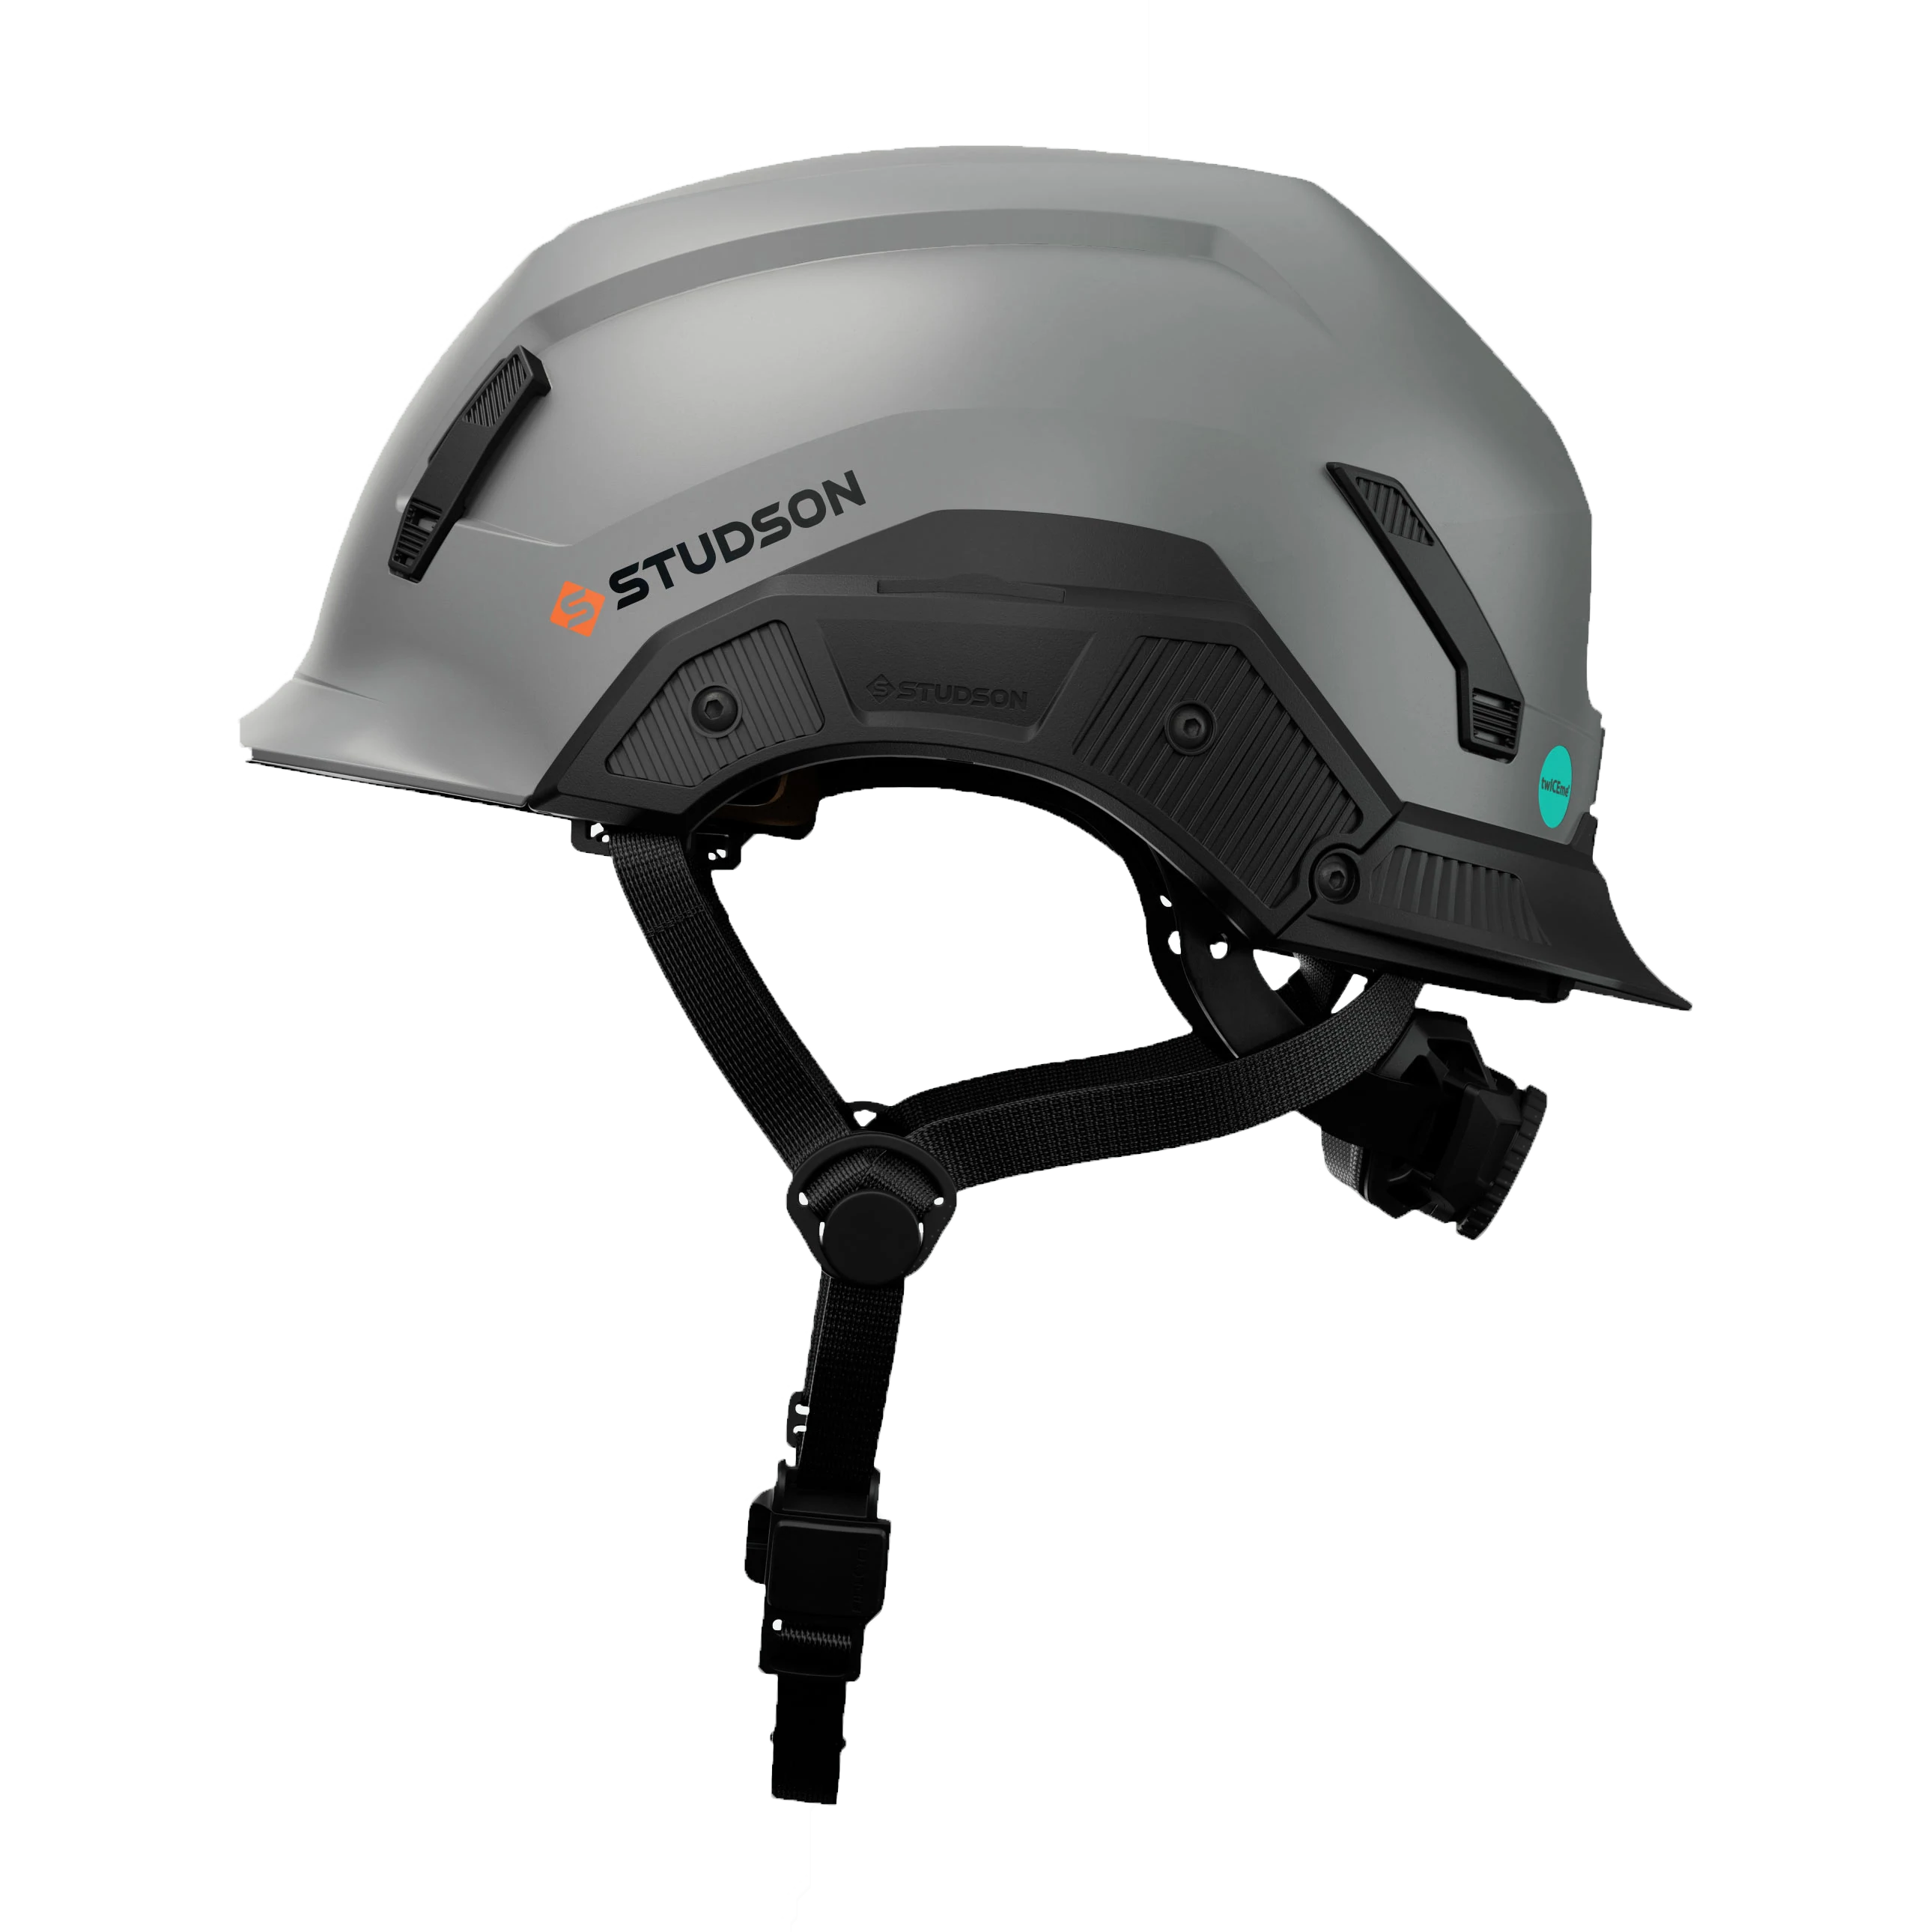 Studson SHK-1 Type 2 Non-Vented Helmet from GME Supply